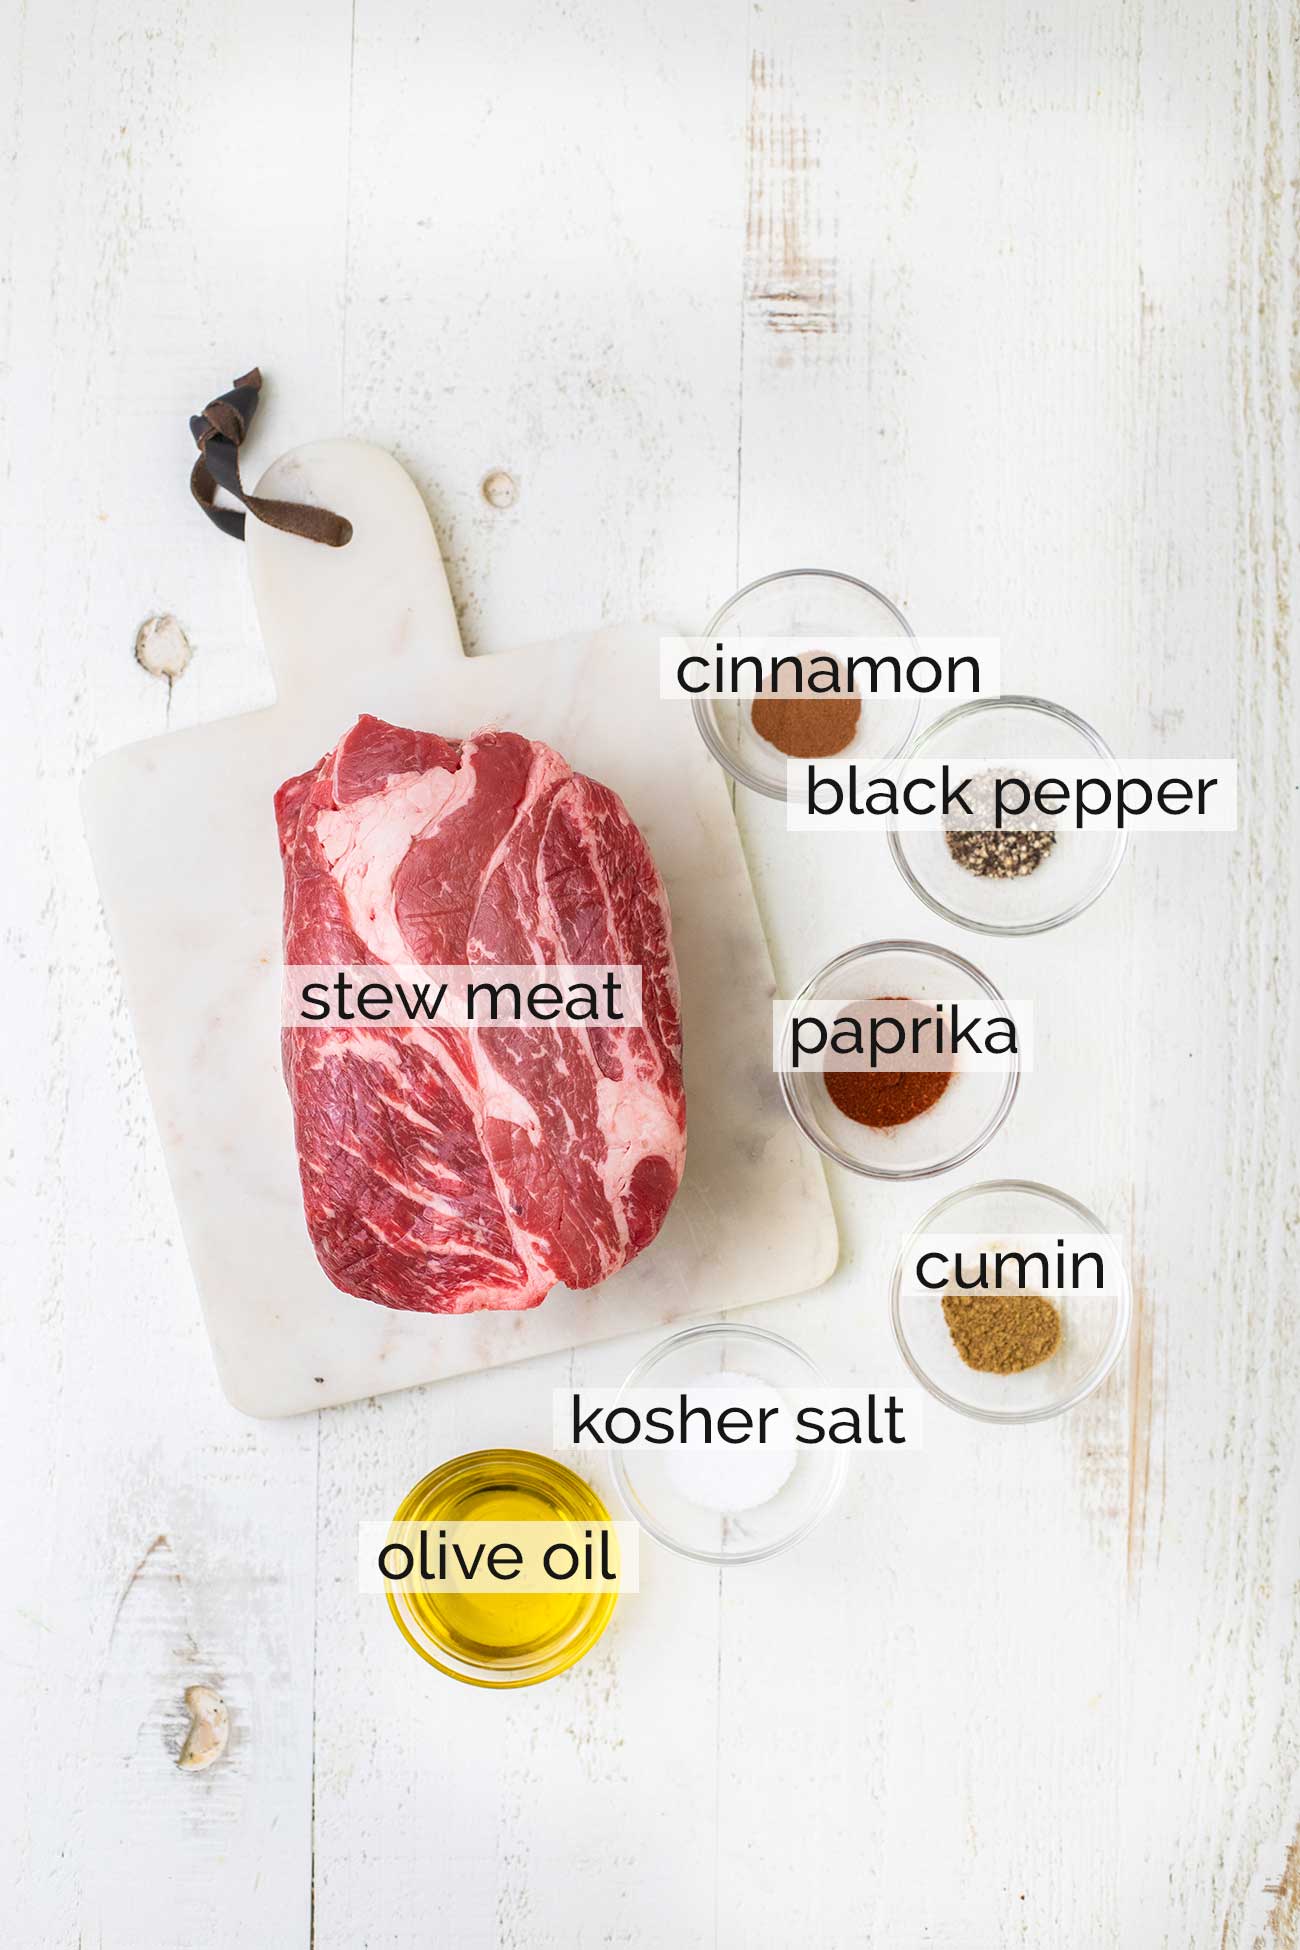 The ingredients needed to prepare the beef to stew.